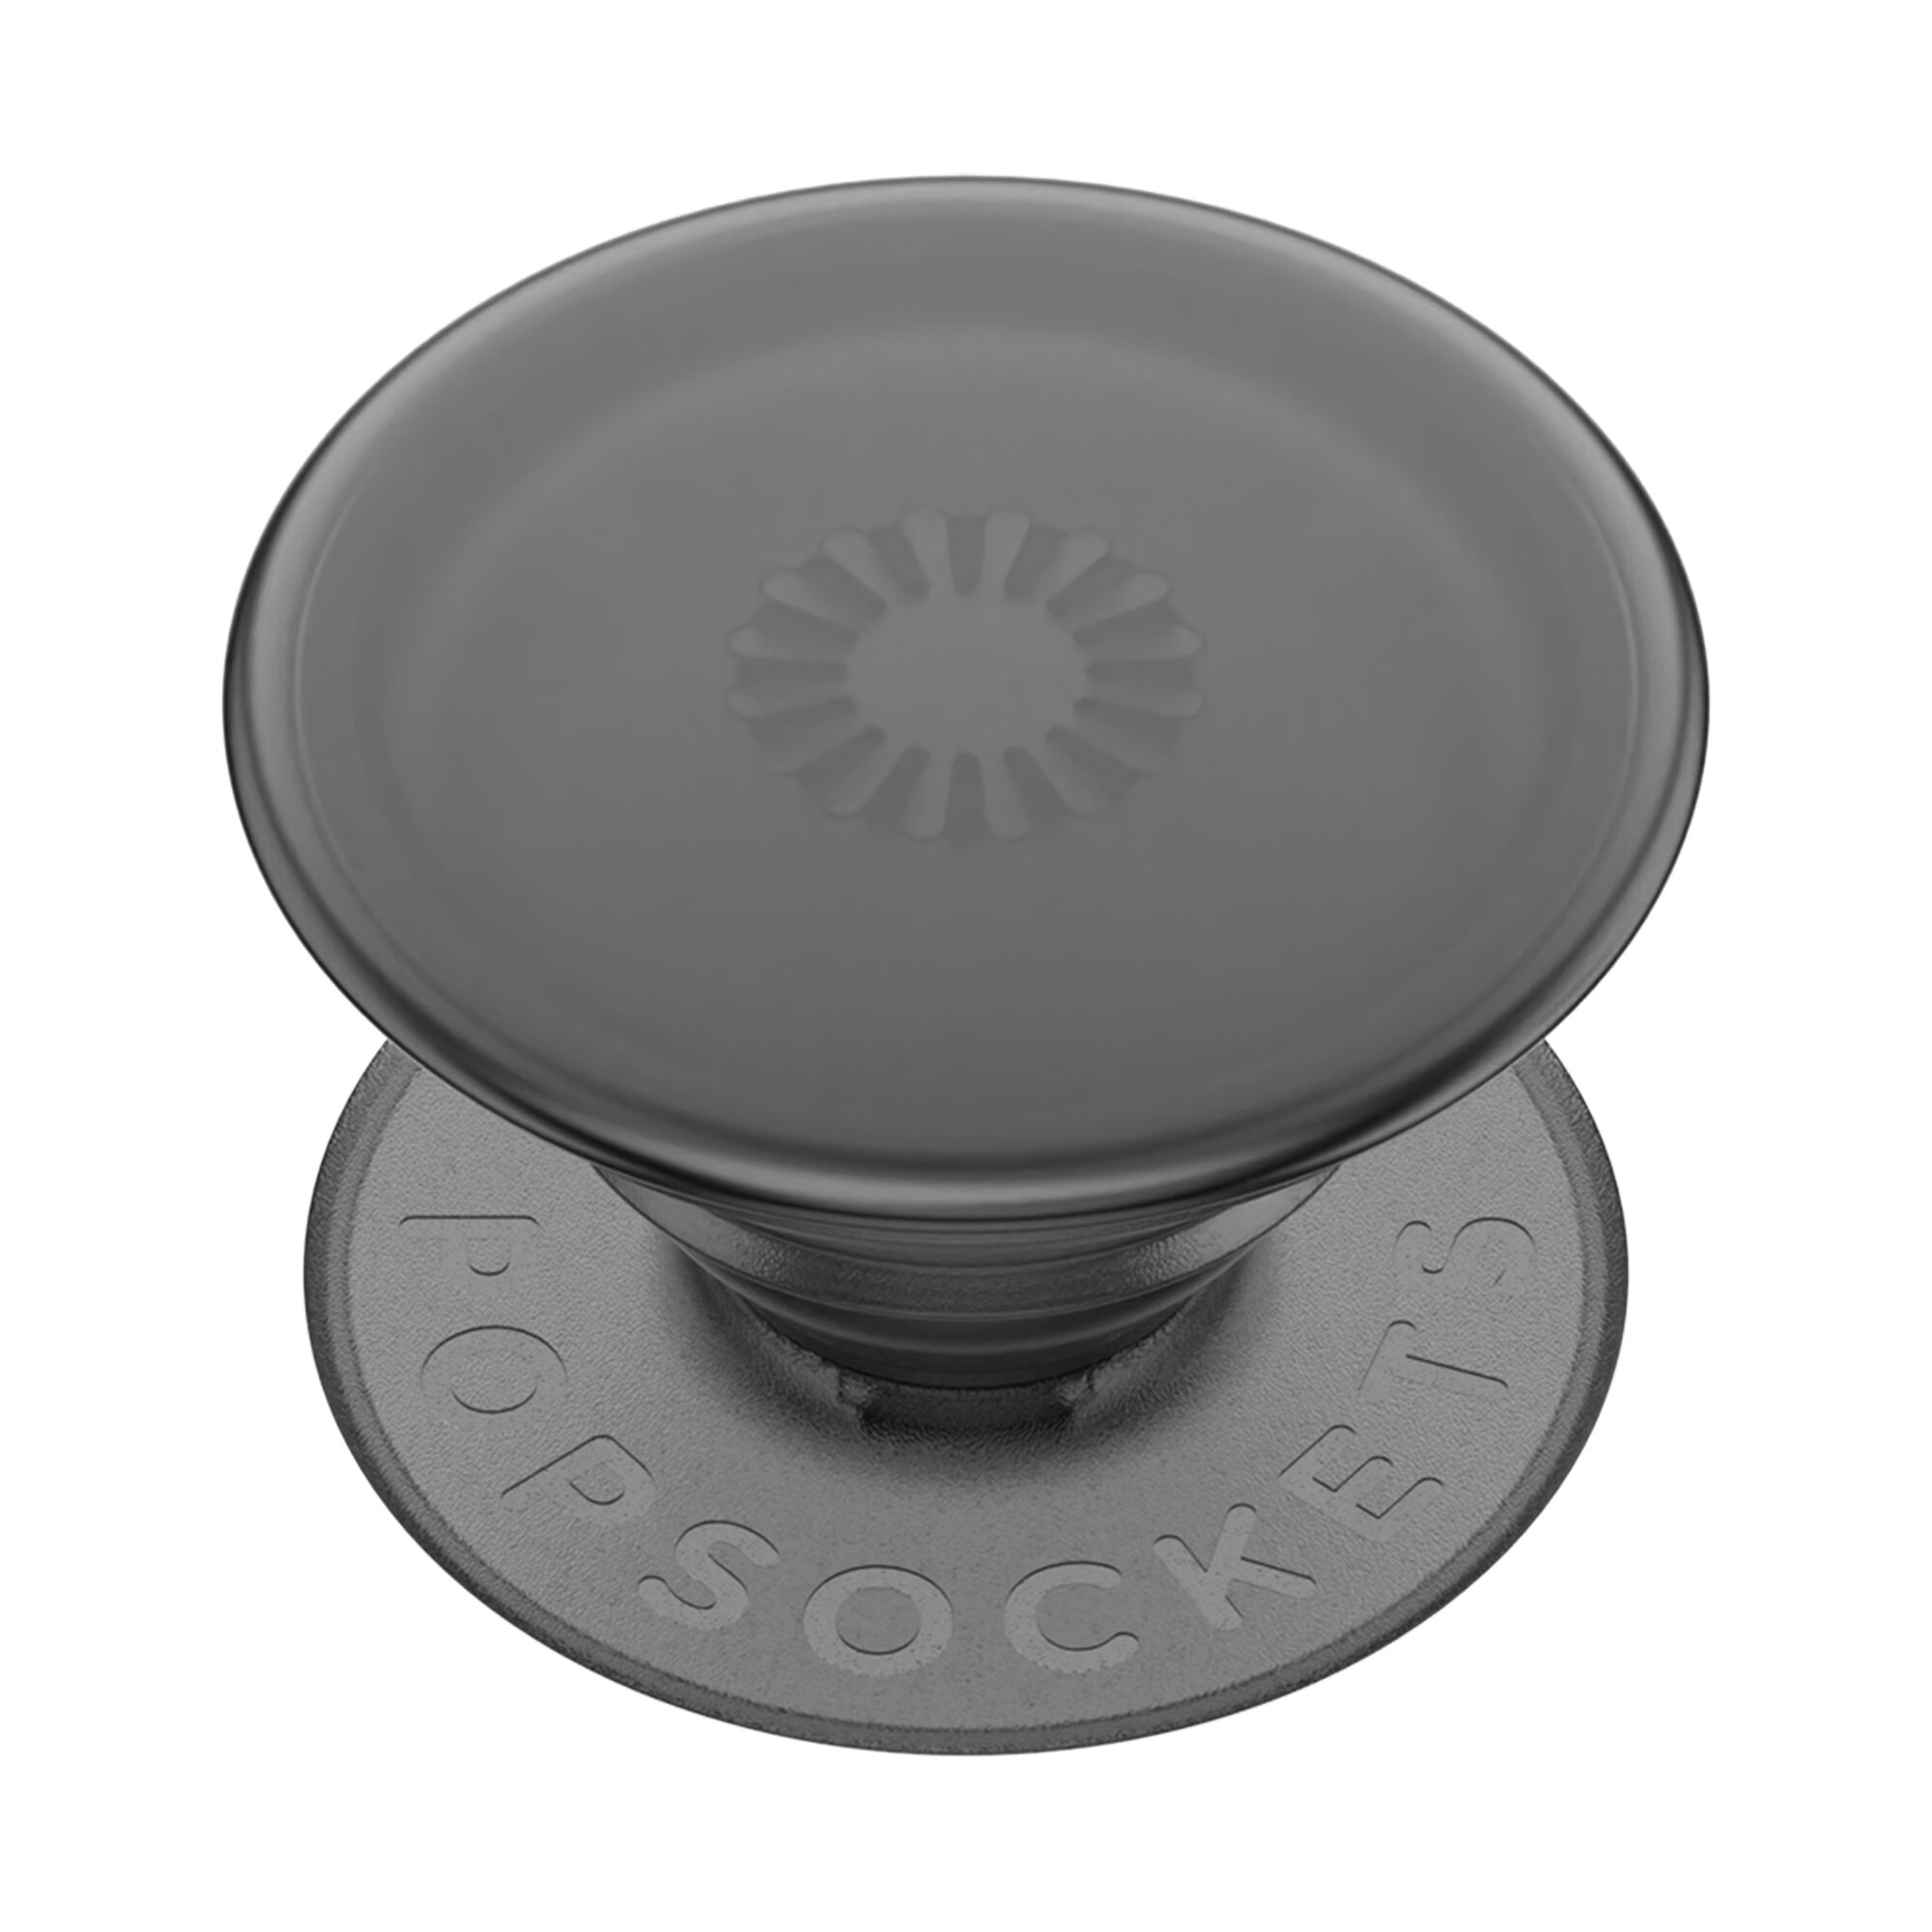 View Claires Popsockets Swappable Popgrip Translucent Smoke Black information